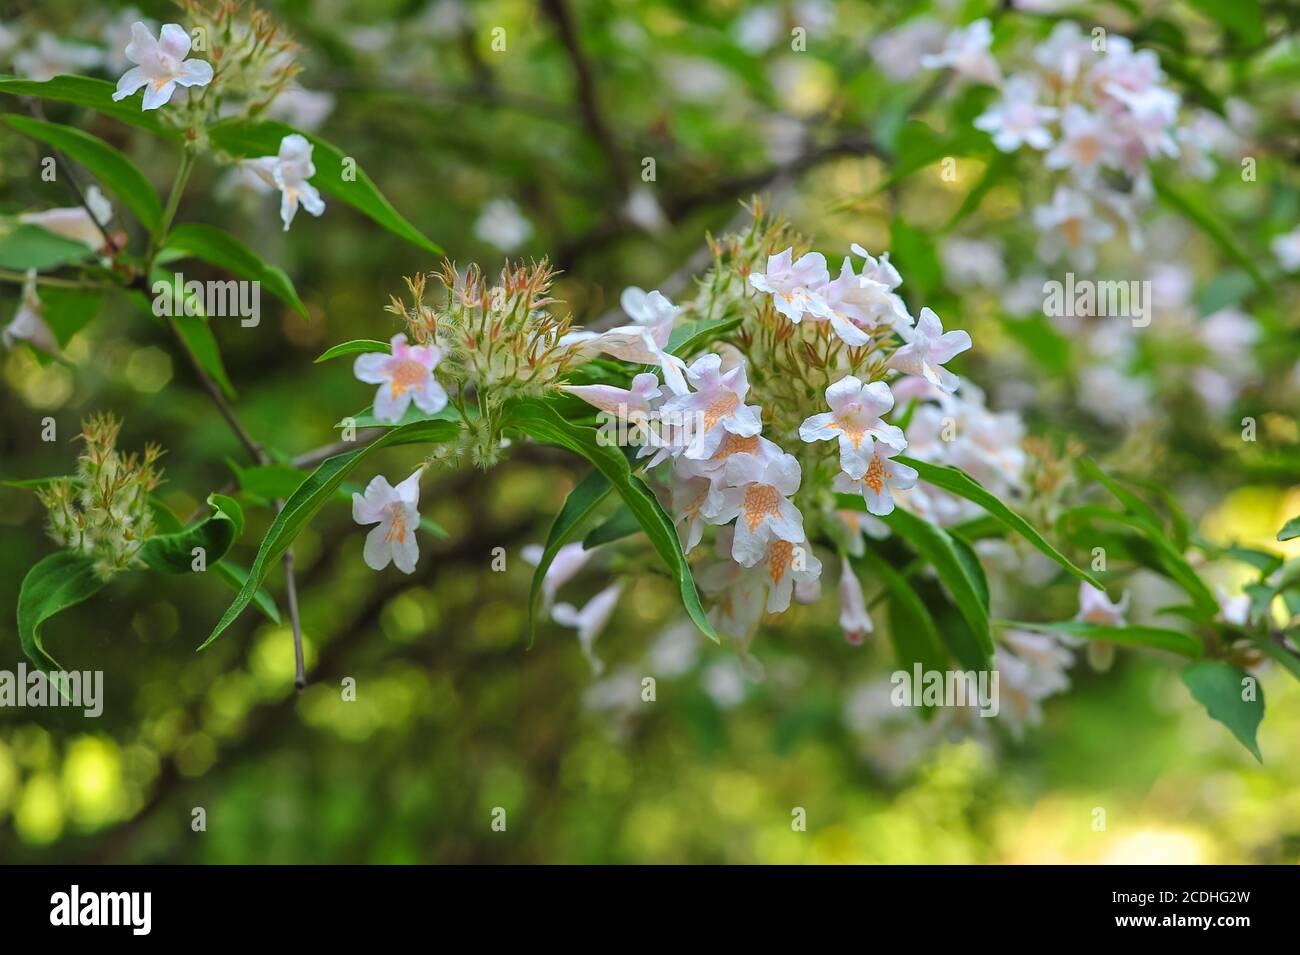 Natural floral botanical background with flowers. Gardening, plants, wood. Branches, leaves and inflorescences of delicate blooming in the garden Stock Photo